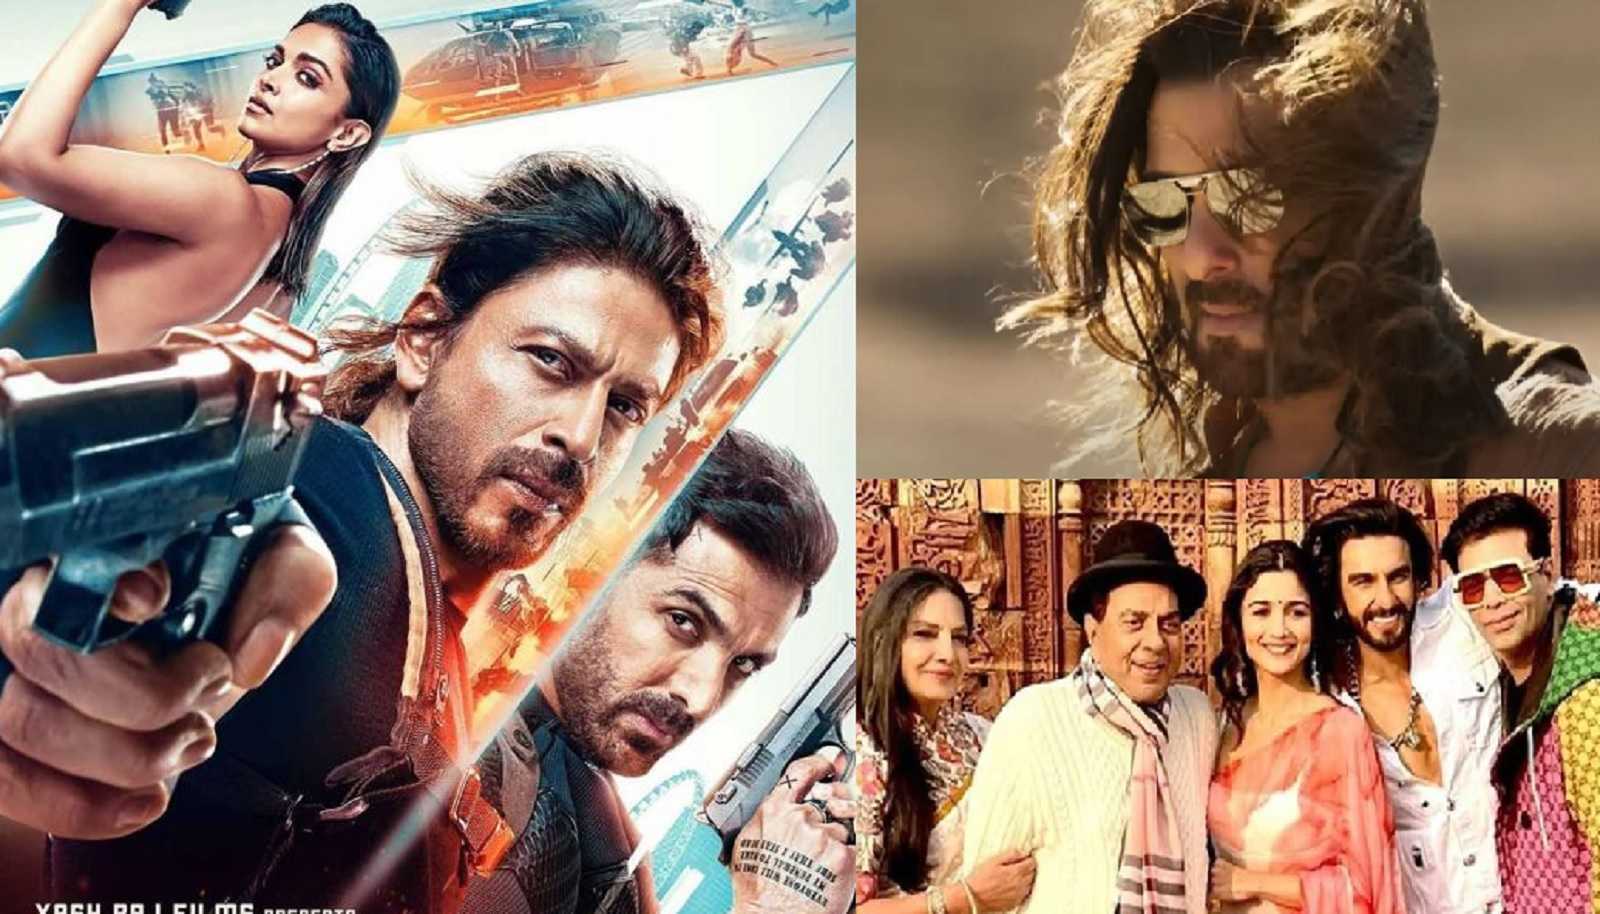 Shah Rukh Khan's Pathaan to Salman Khan's Kisi Ka Bhai Kisi Ka Jaan, THESE big-ticket releases are eyeing to storm box office in 2023